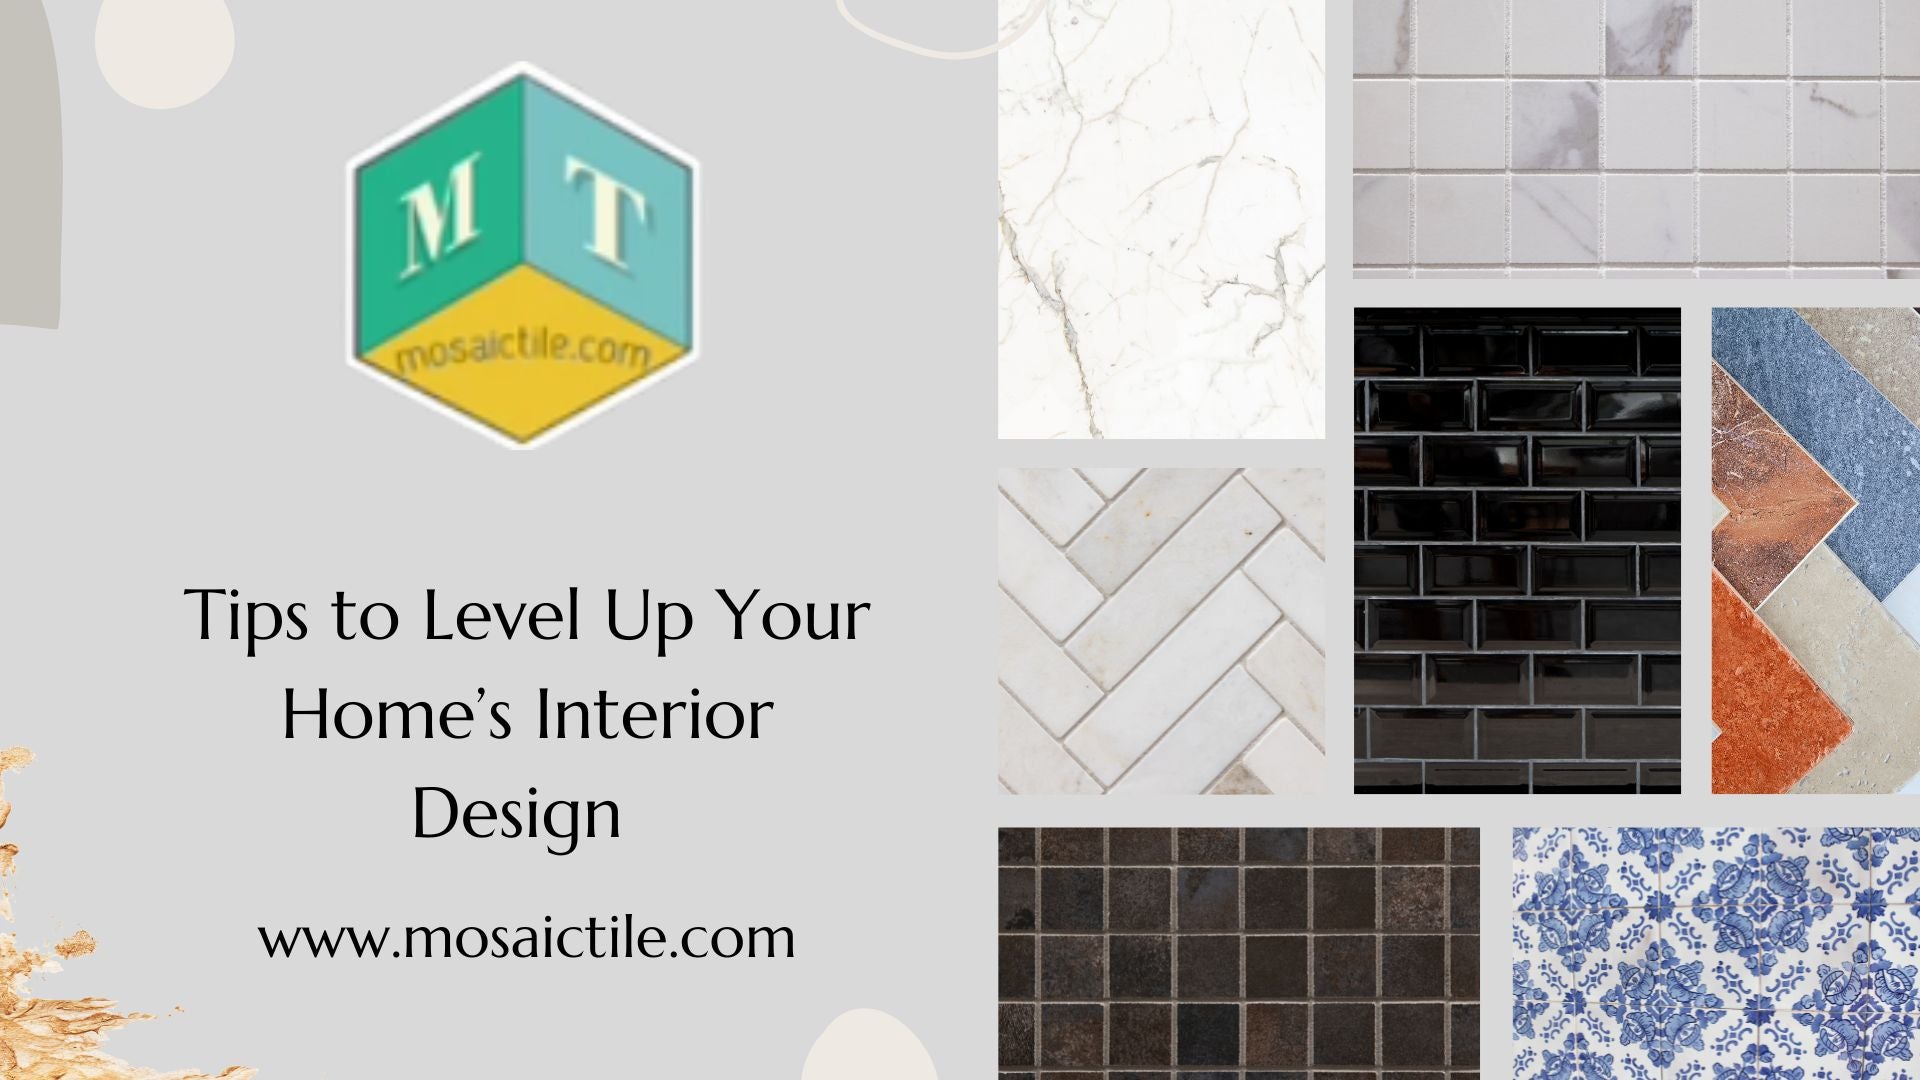 Tips to Level Up Your Home’s Interior Design